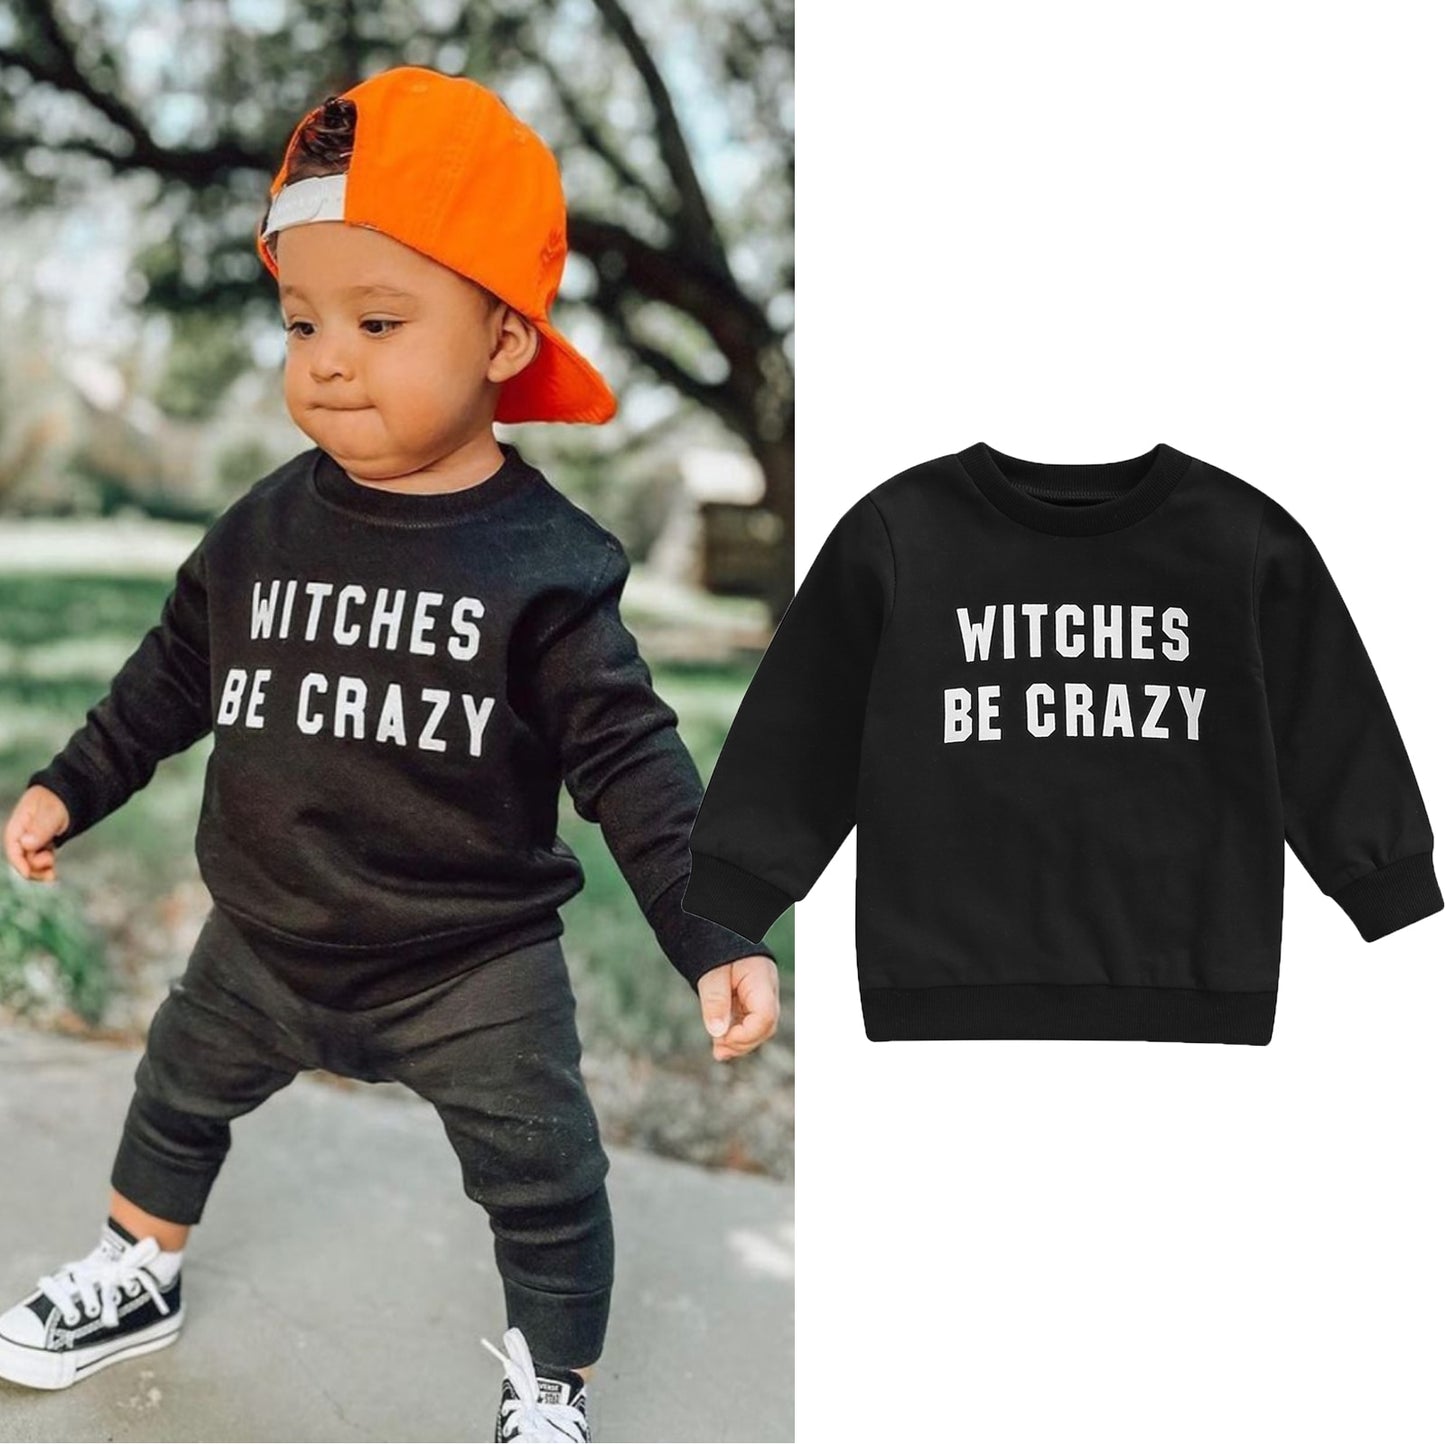 Witches Be Crazy Sweater